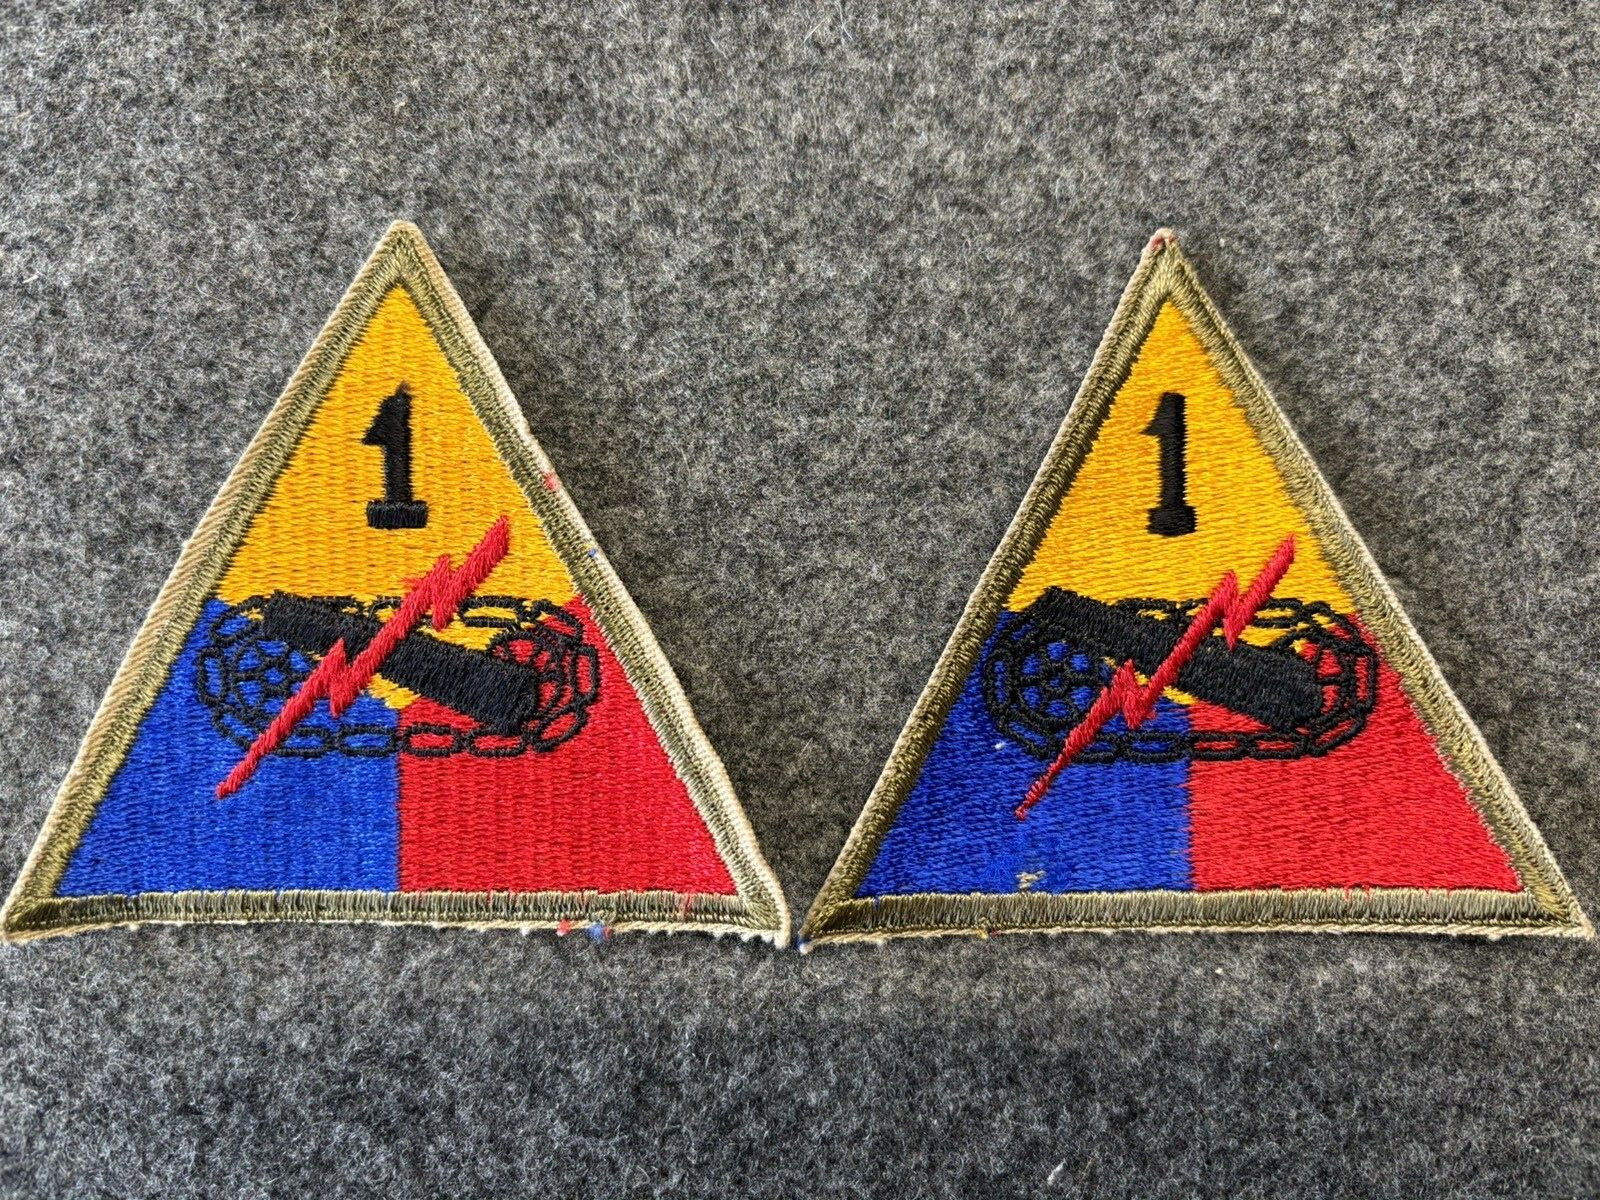 Two Slightly Different US Army WWII 1st Armored Division Shoulder Patches